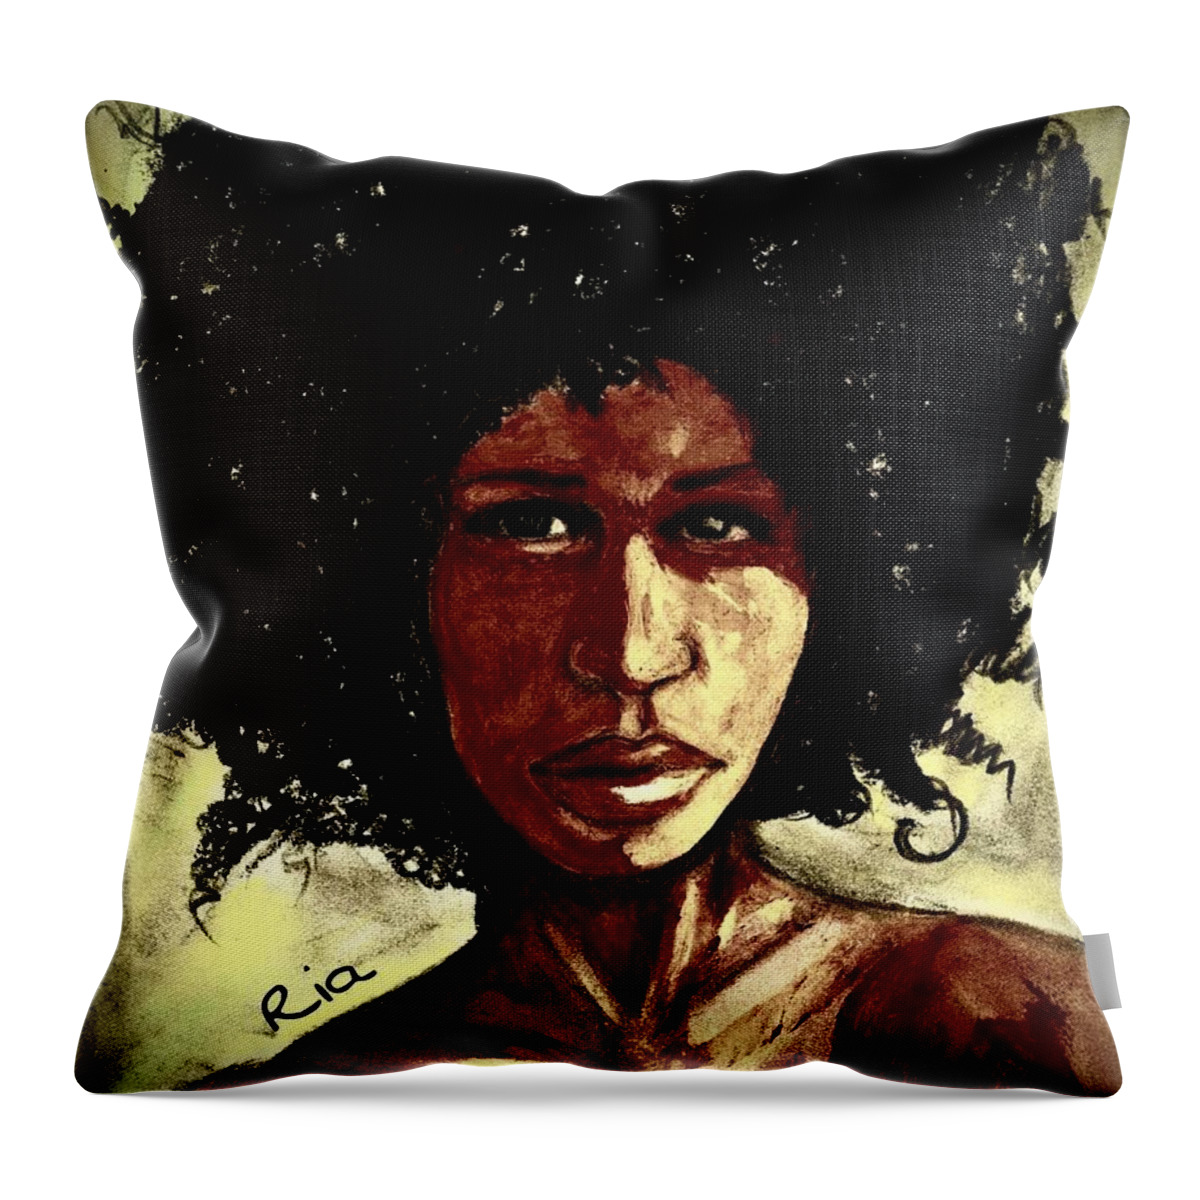 Beautiful Throw Pillow featuring the photograph Take me or leave me Alone by Artist RiA